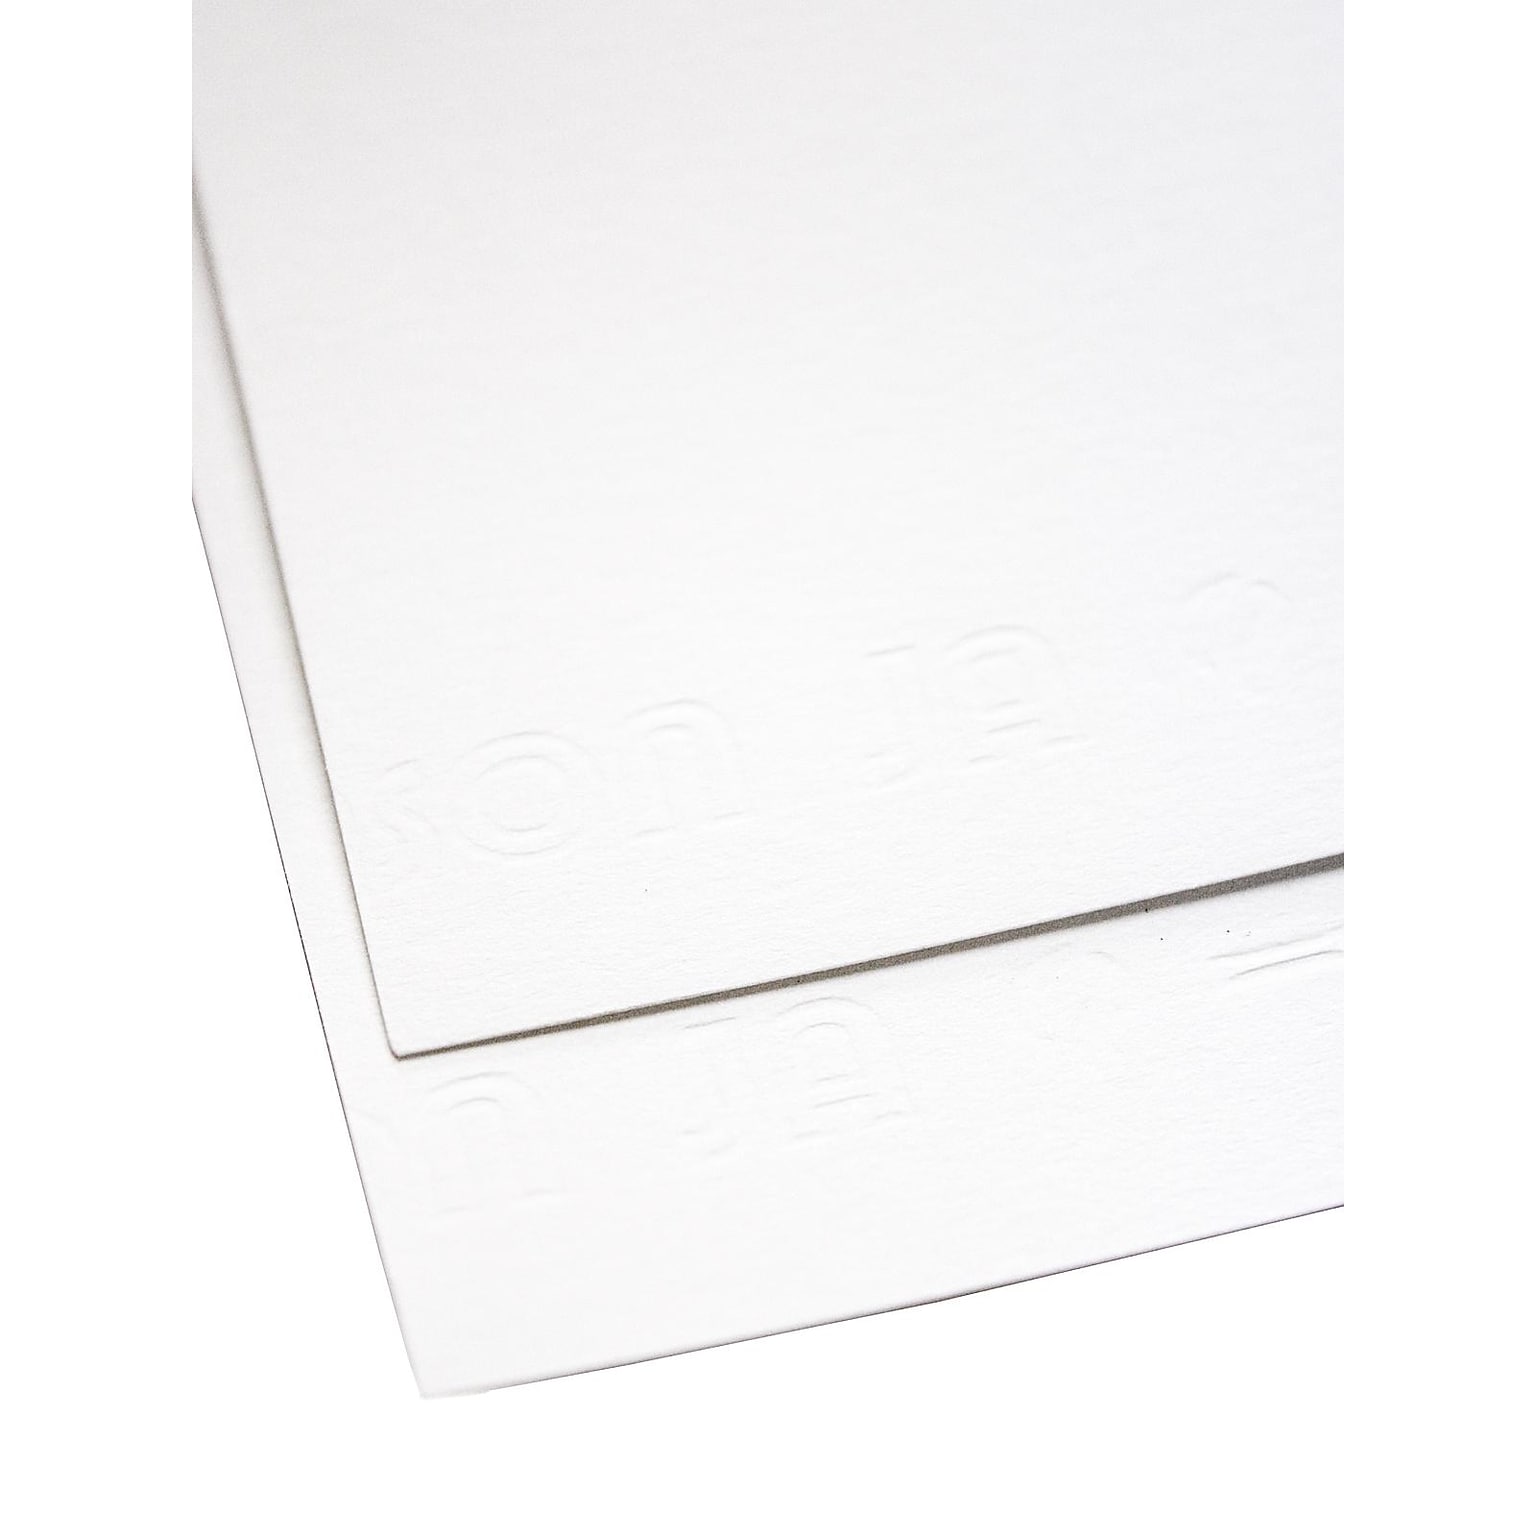 Canson Dessin 200 Pure White Drawing Paper 19 1/2 in. x 25 1/2 in. sheet [Pack of 10](PK10-100511129)